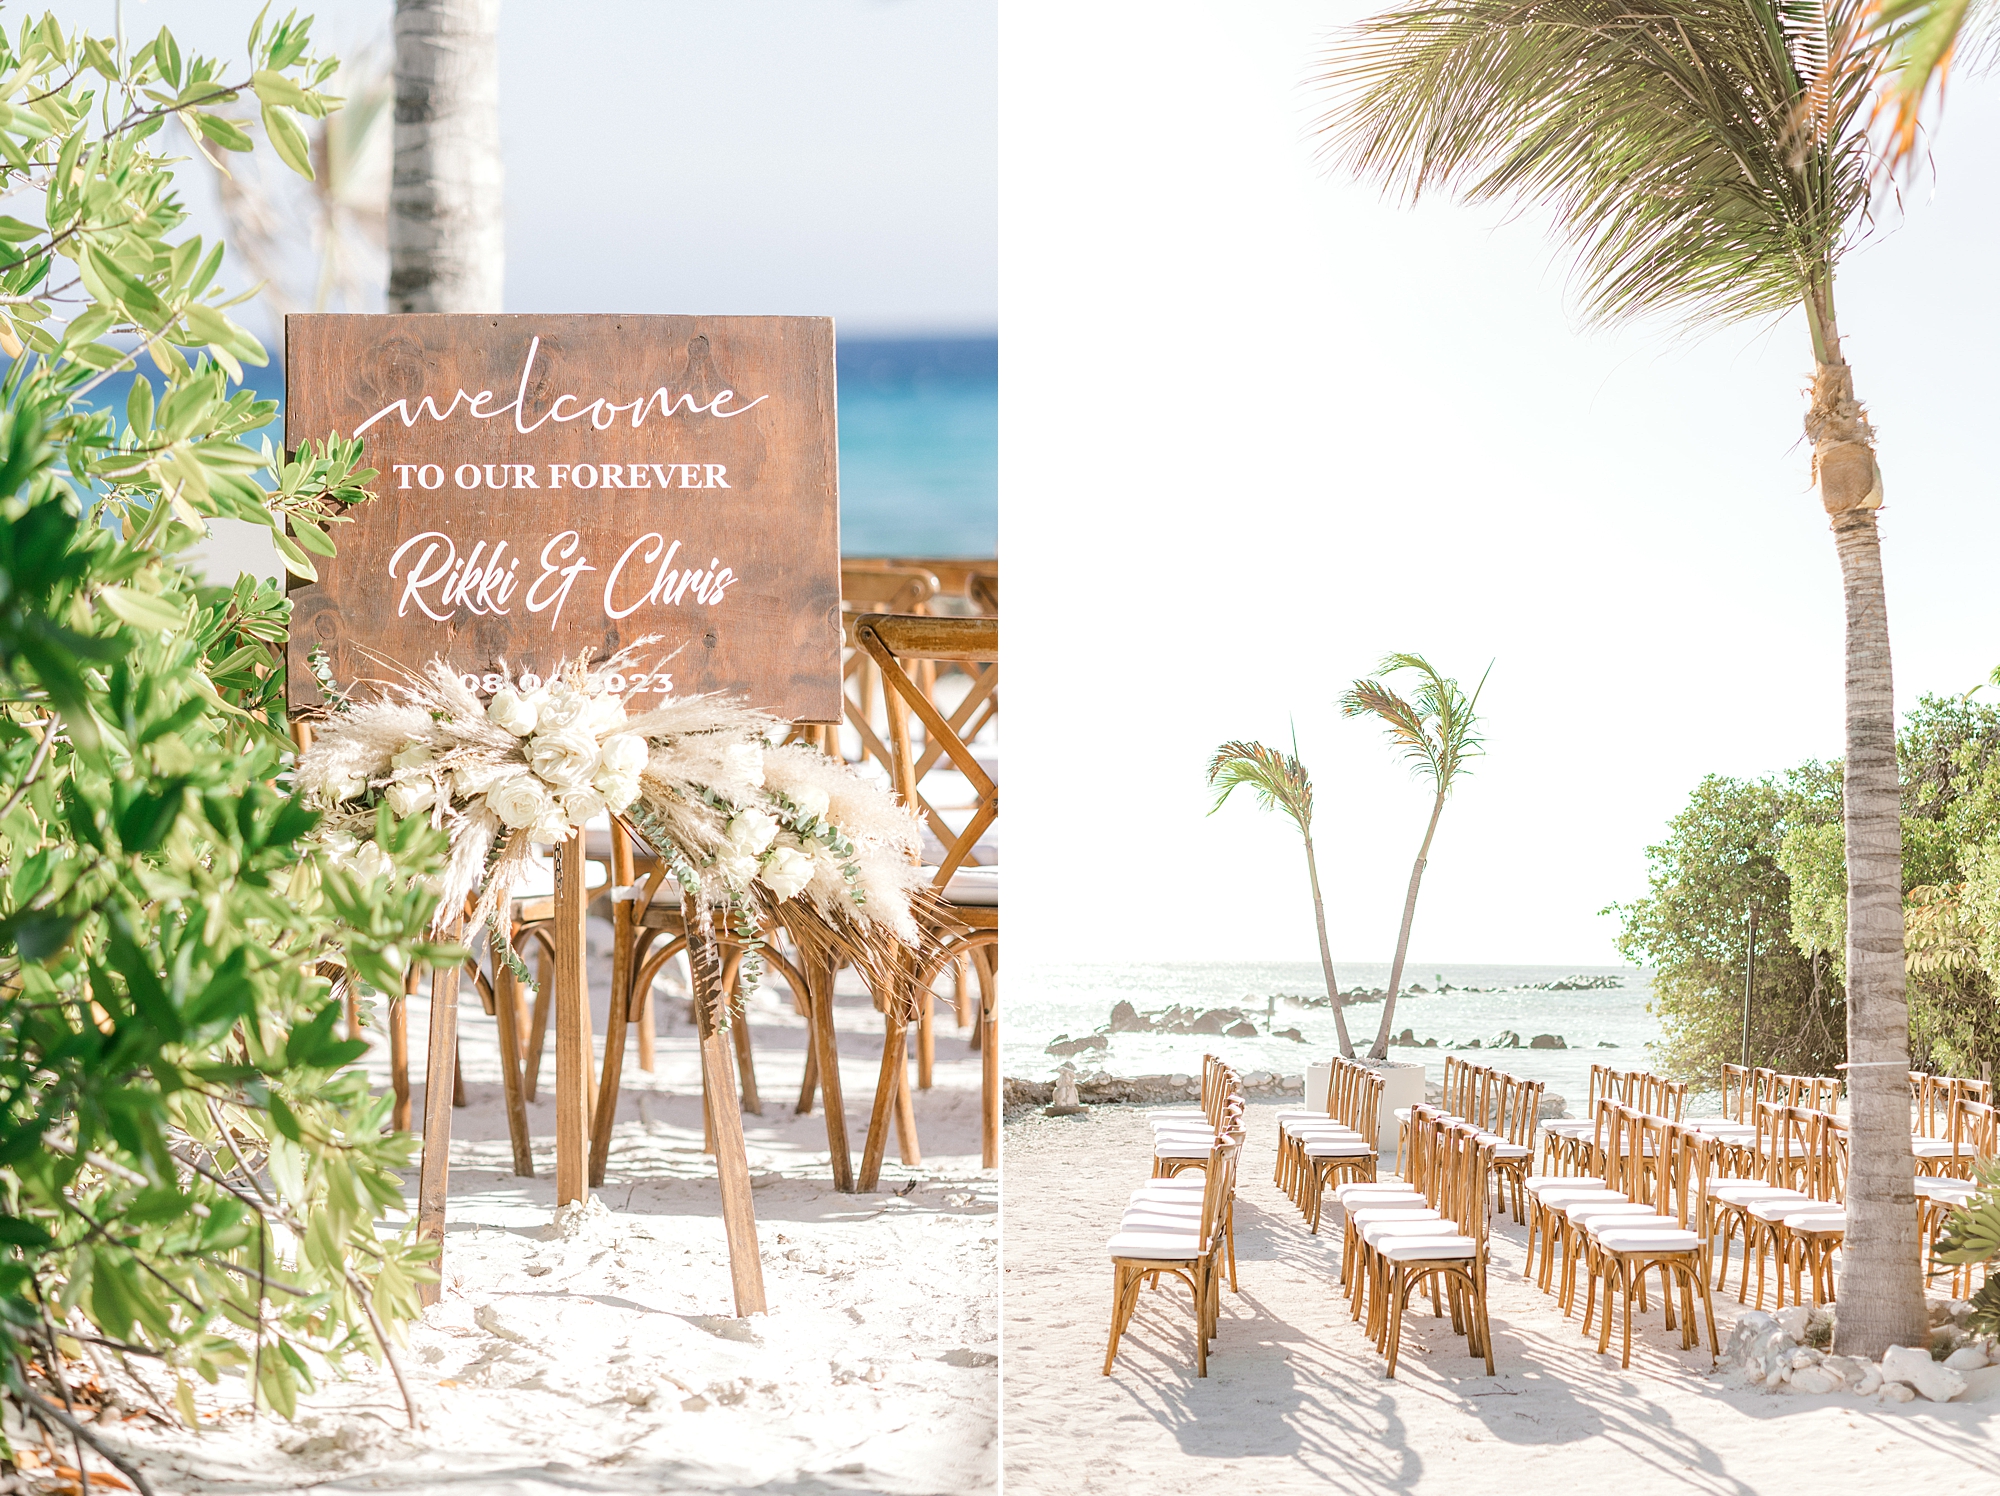 details for wedding ceremony on beach at Flamingo Island